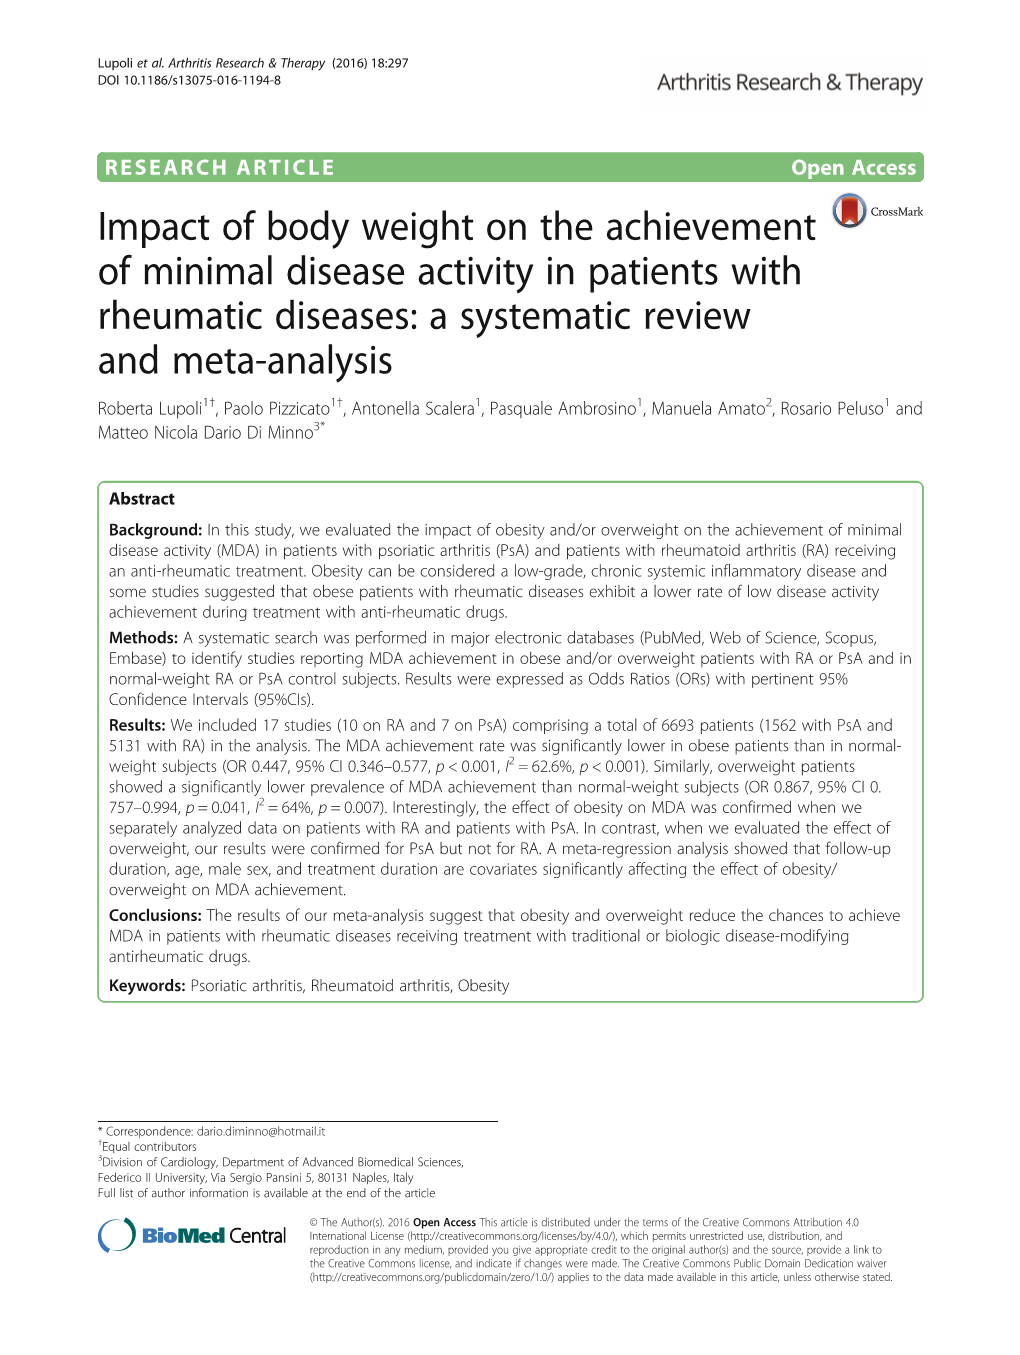 Impact of Body Weight on the Achievement of Minimal Disease